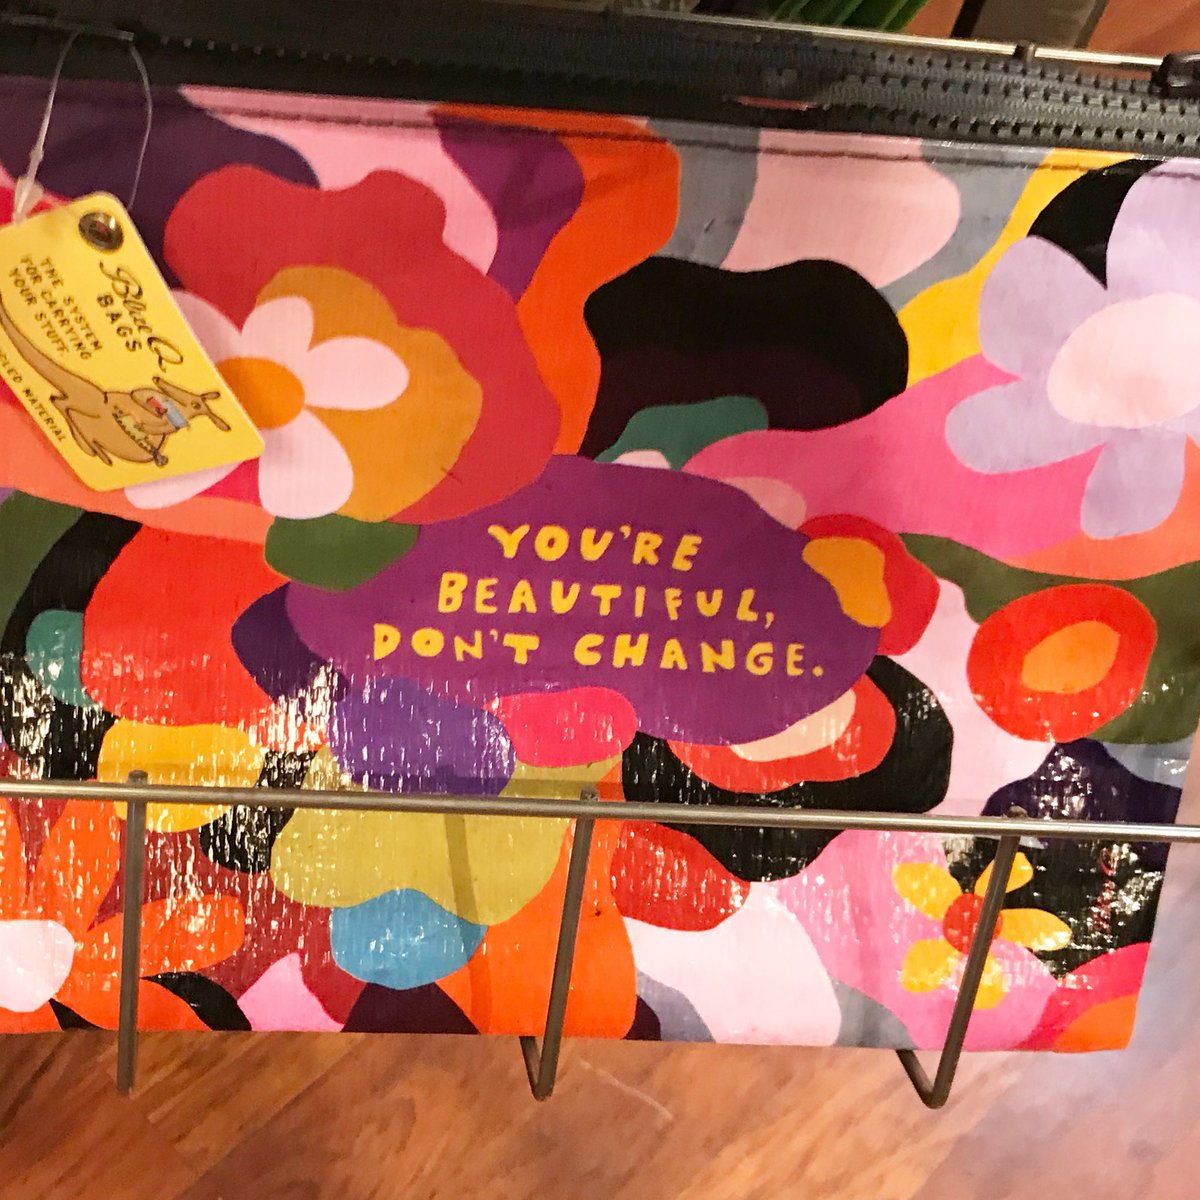 You’re beautiful don’t change!! 
❤️🧡💗💛💚💜💙🤍🤎🖤❣️

#tuesdaytruth #truebeauty #truth #beautiful #dontchange #colorful #cosmeticsbag #blueqbags #traveling #artiseverywhere #colorstreetstylist #nastersfaster #colorstreetlife #RCJH #tropicaltalker